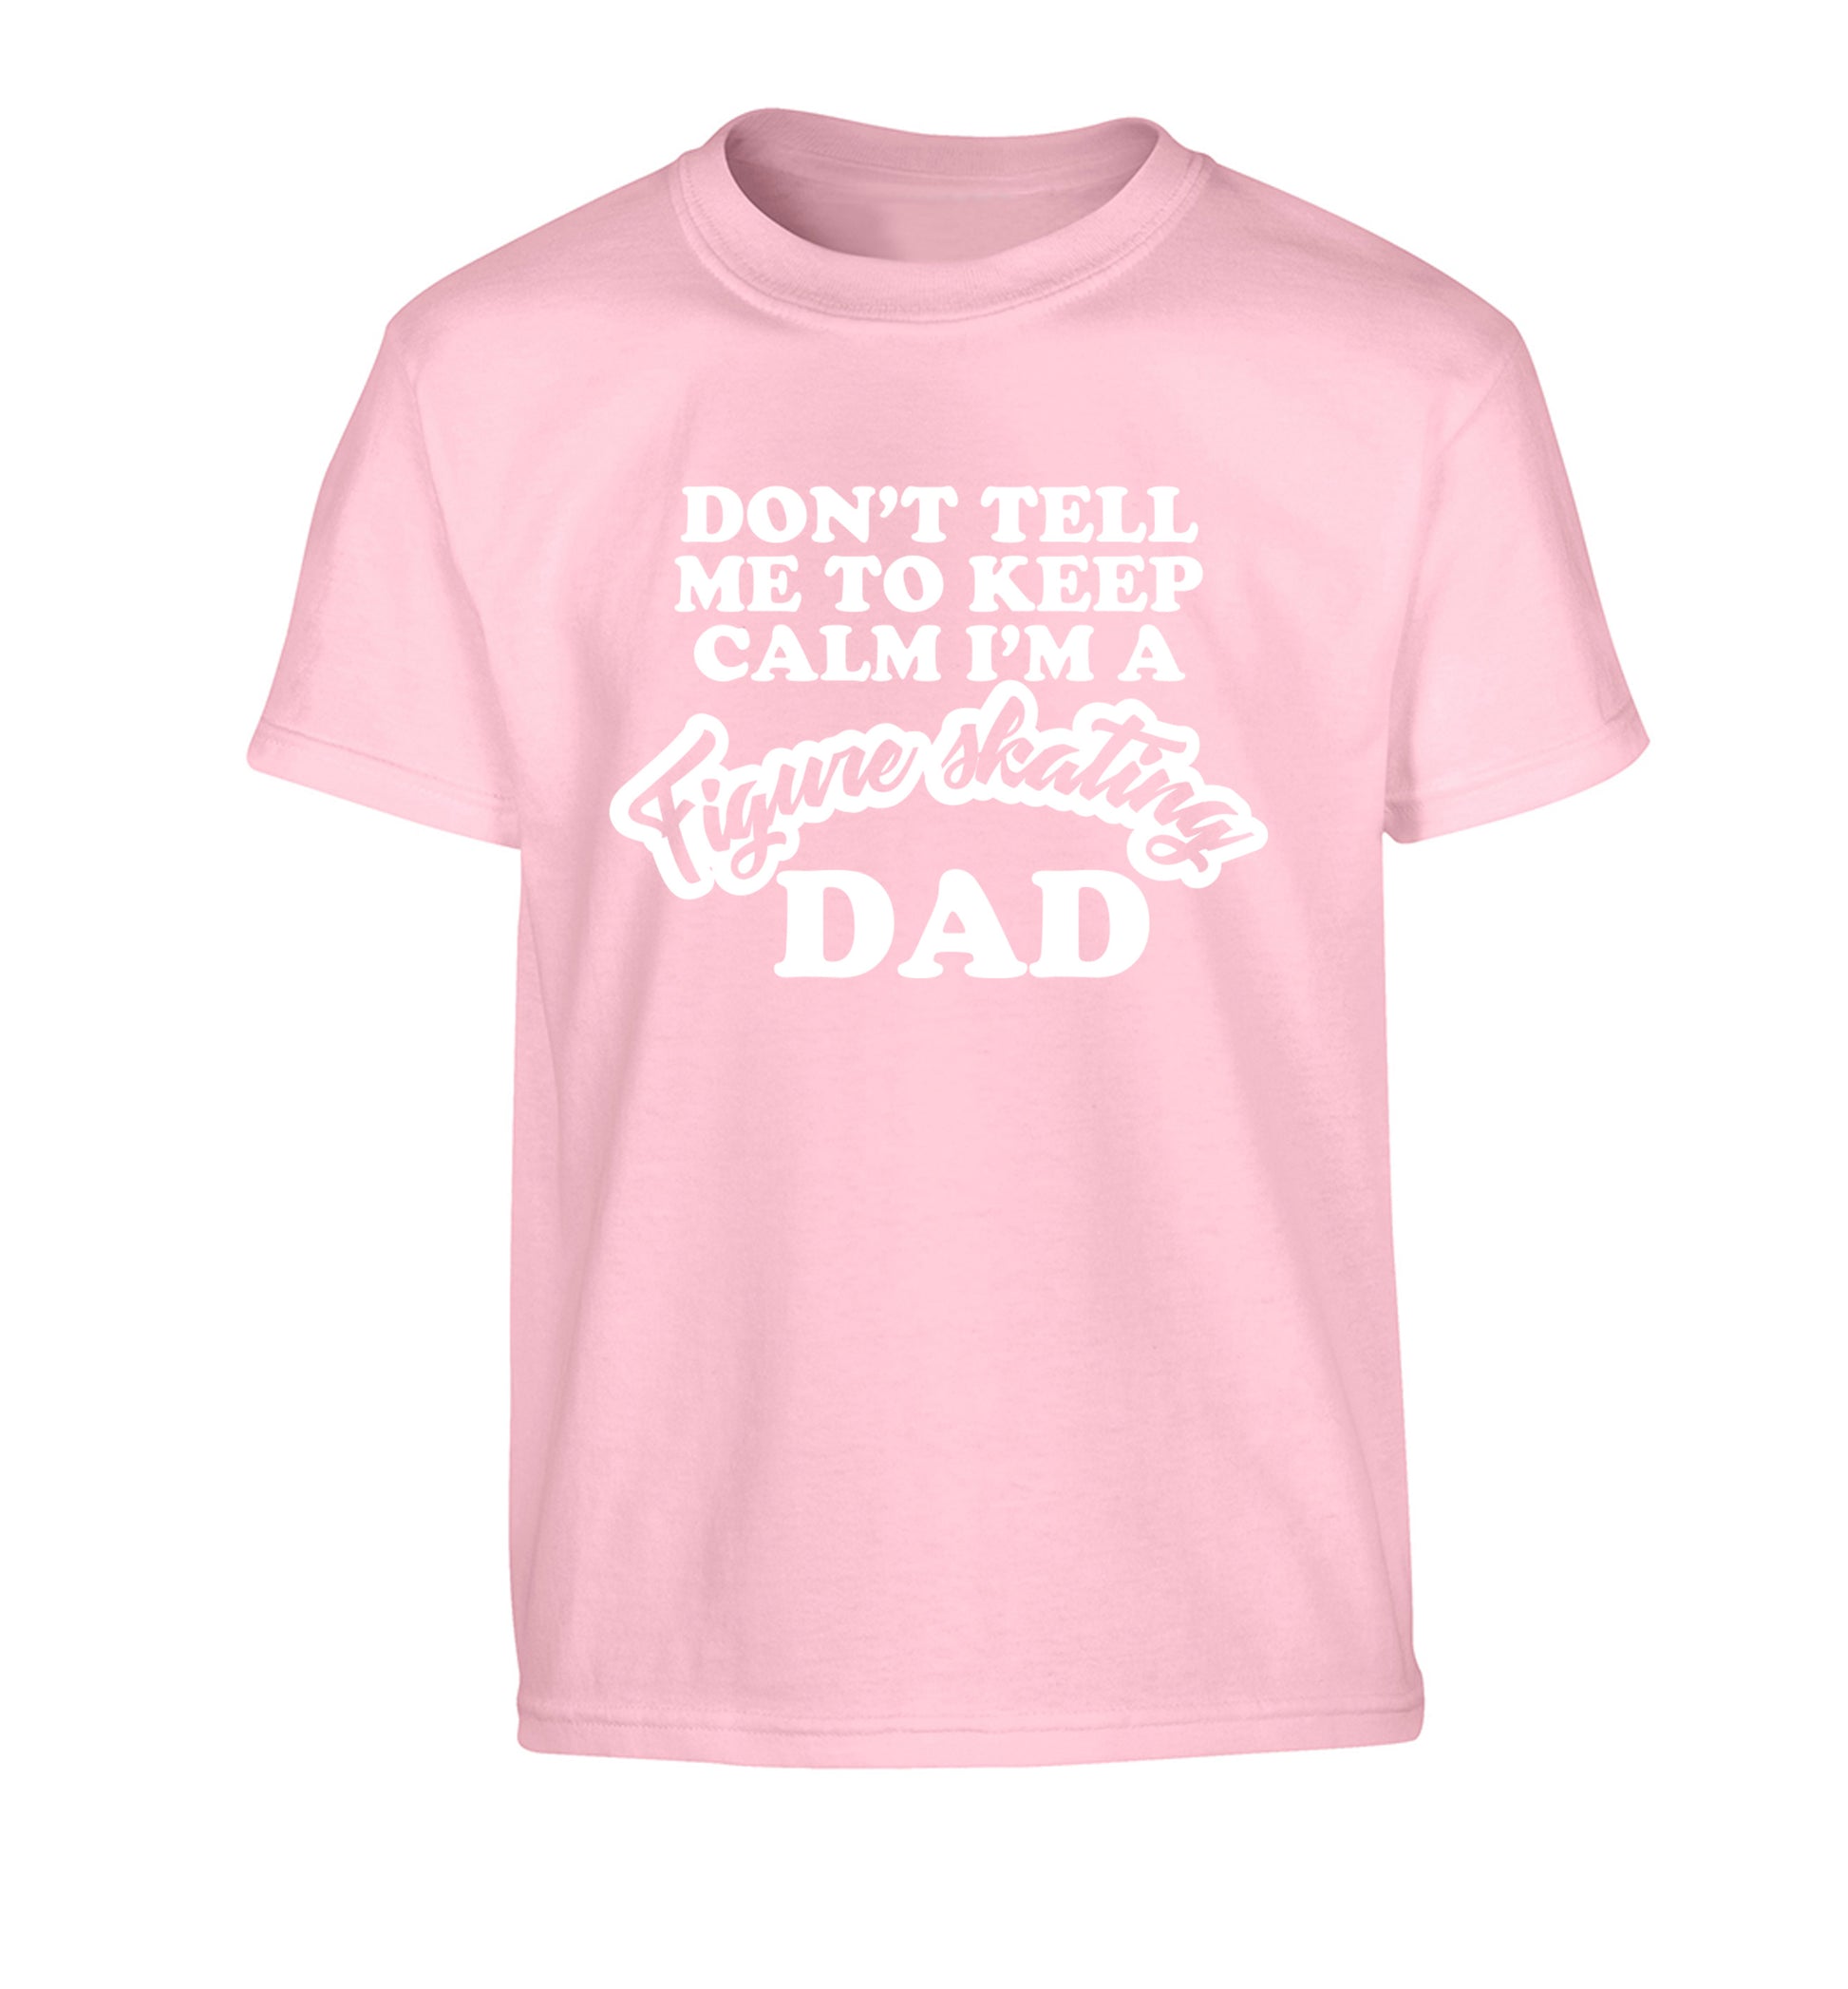 Don't tell me to keep calm I'm a figure skating dad Children's light pink Tshirt 12-14 Years